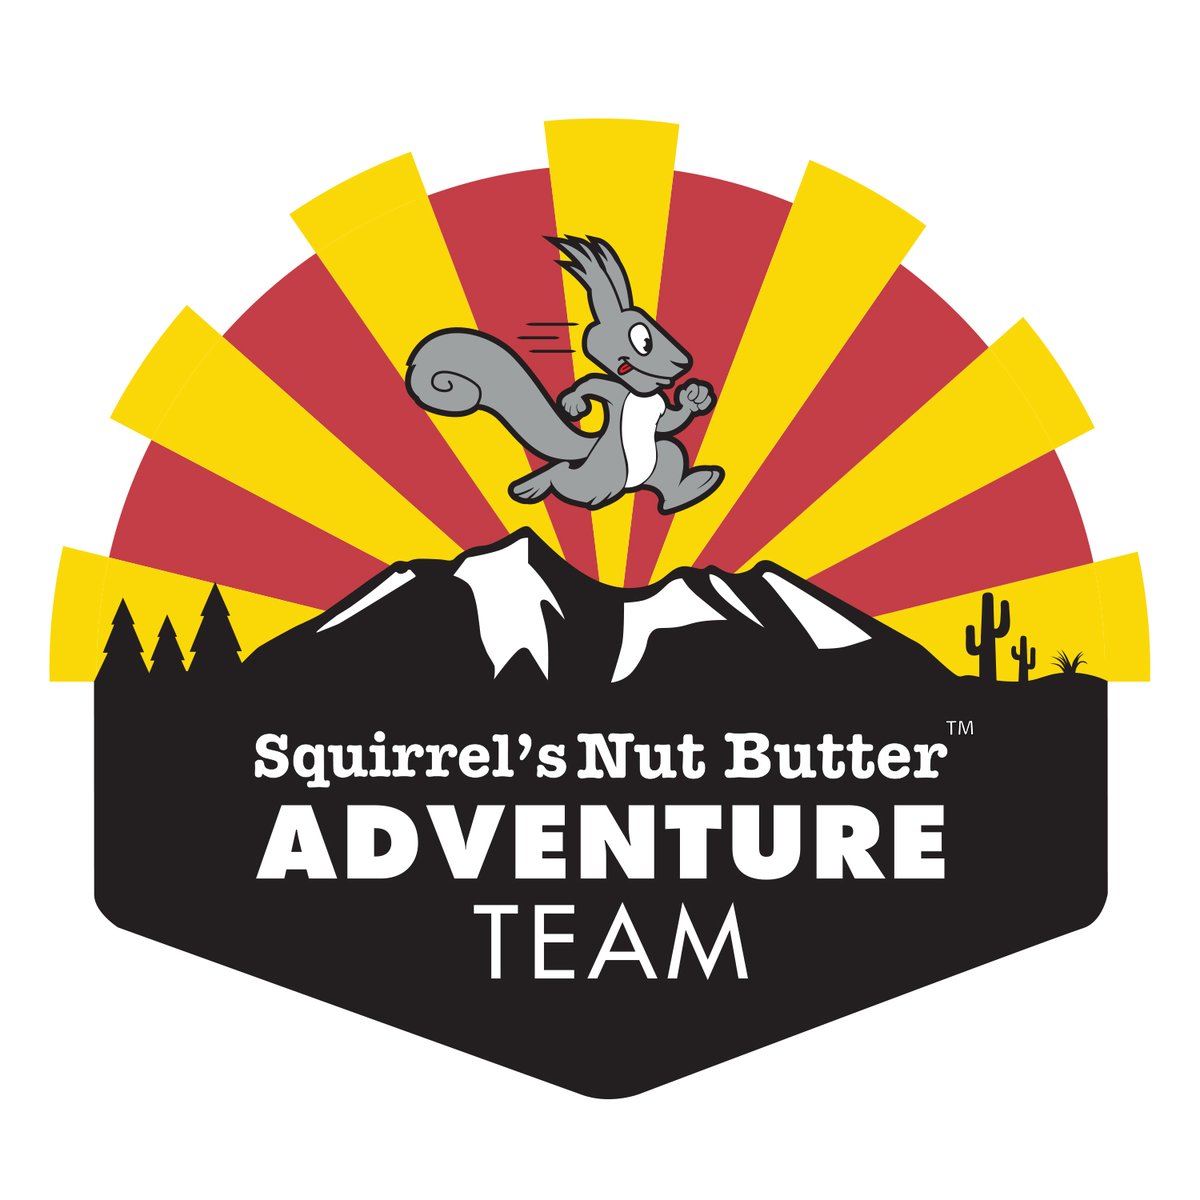 Sweet! So stoked to be back on the @squirrelsnutbut team for 2024!
#lubelife #SNB #squirrelsnutbutter